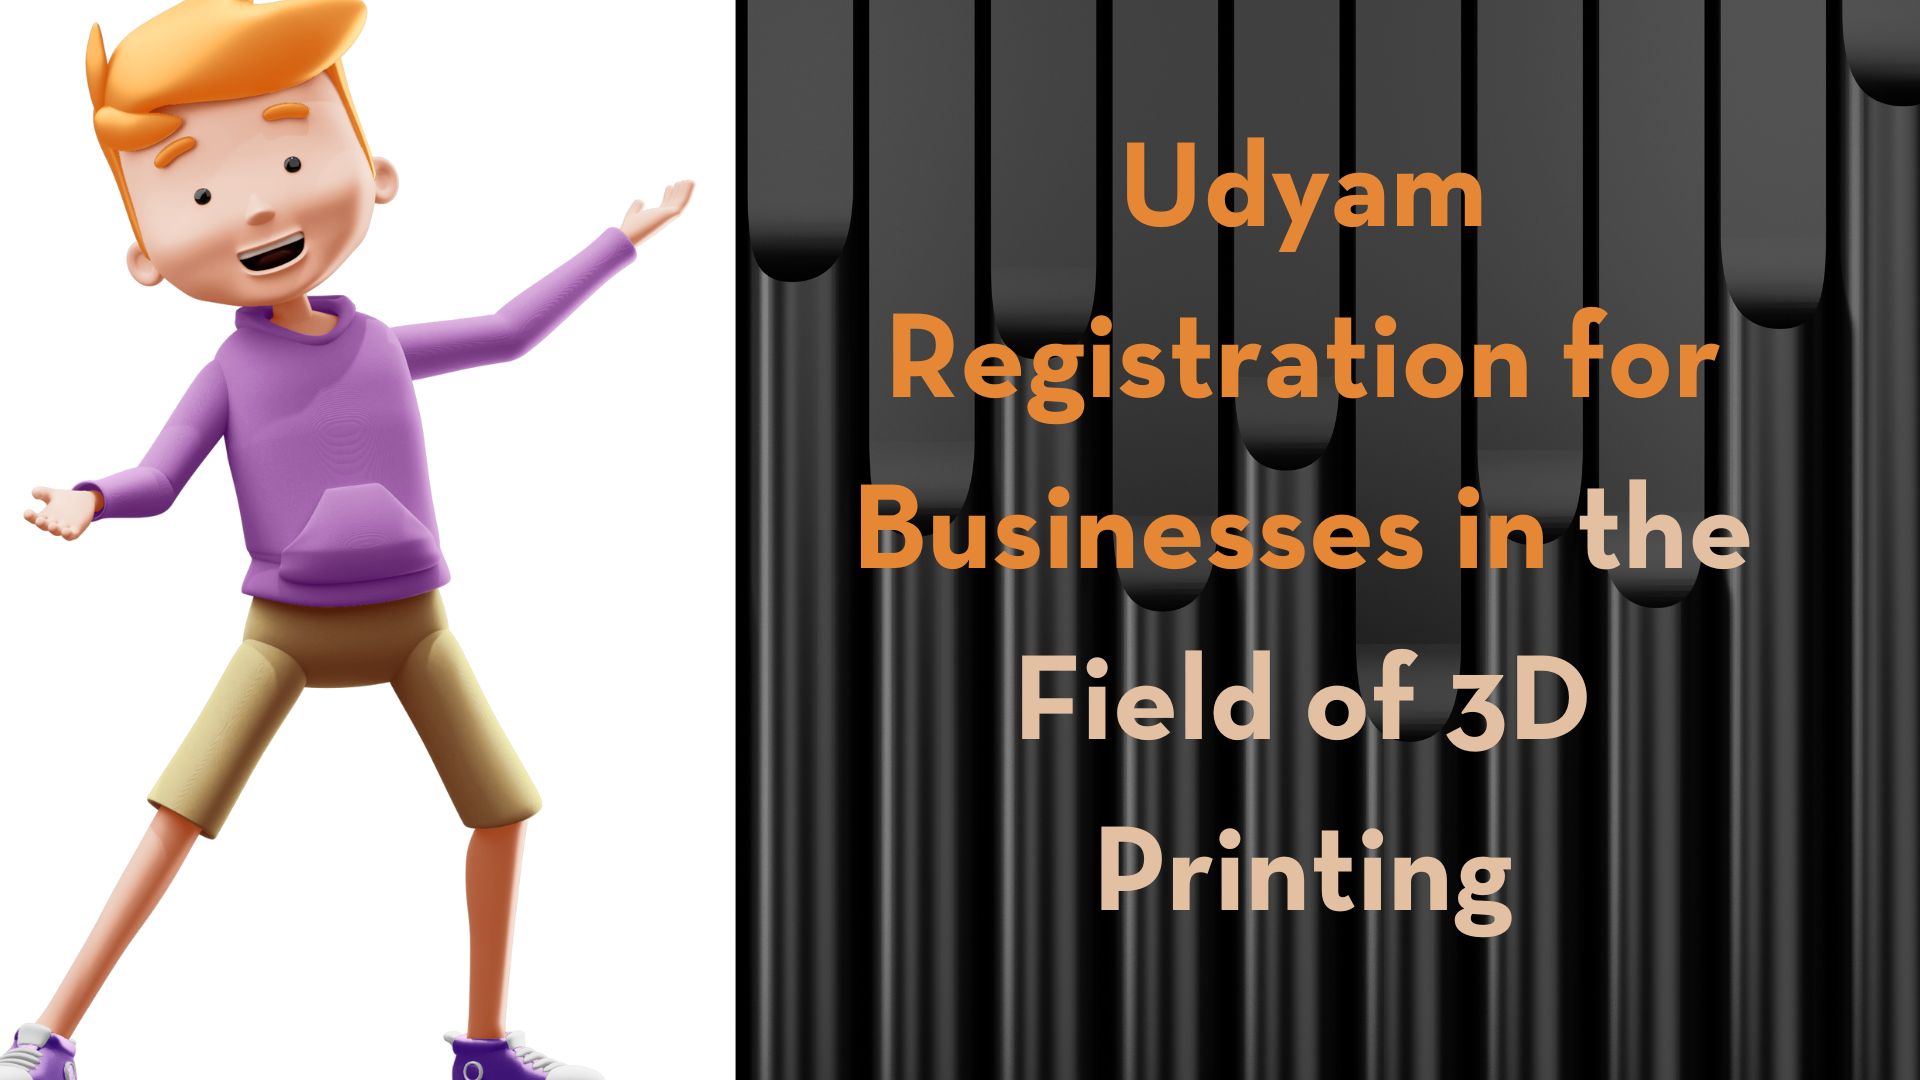 Udyam Registration for Businesses in the Field of 3D Printing